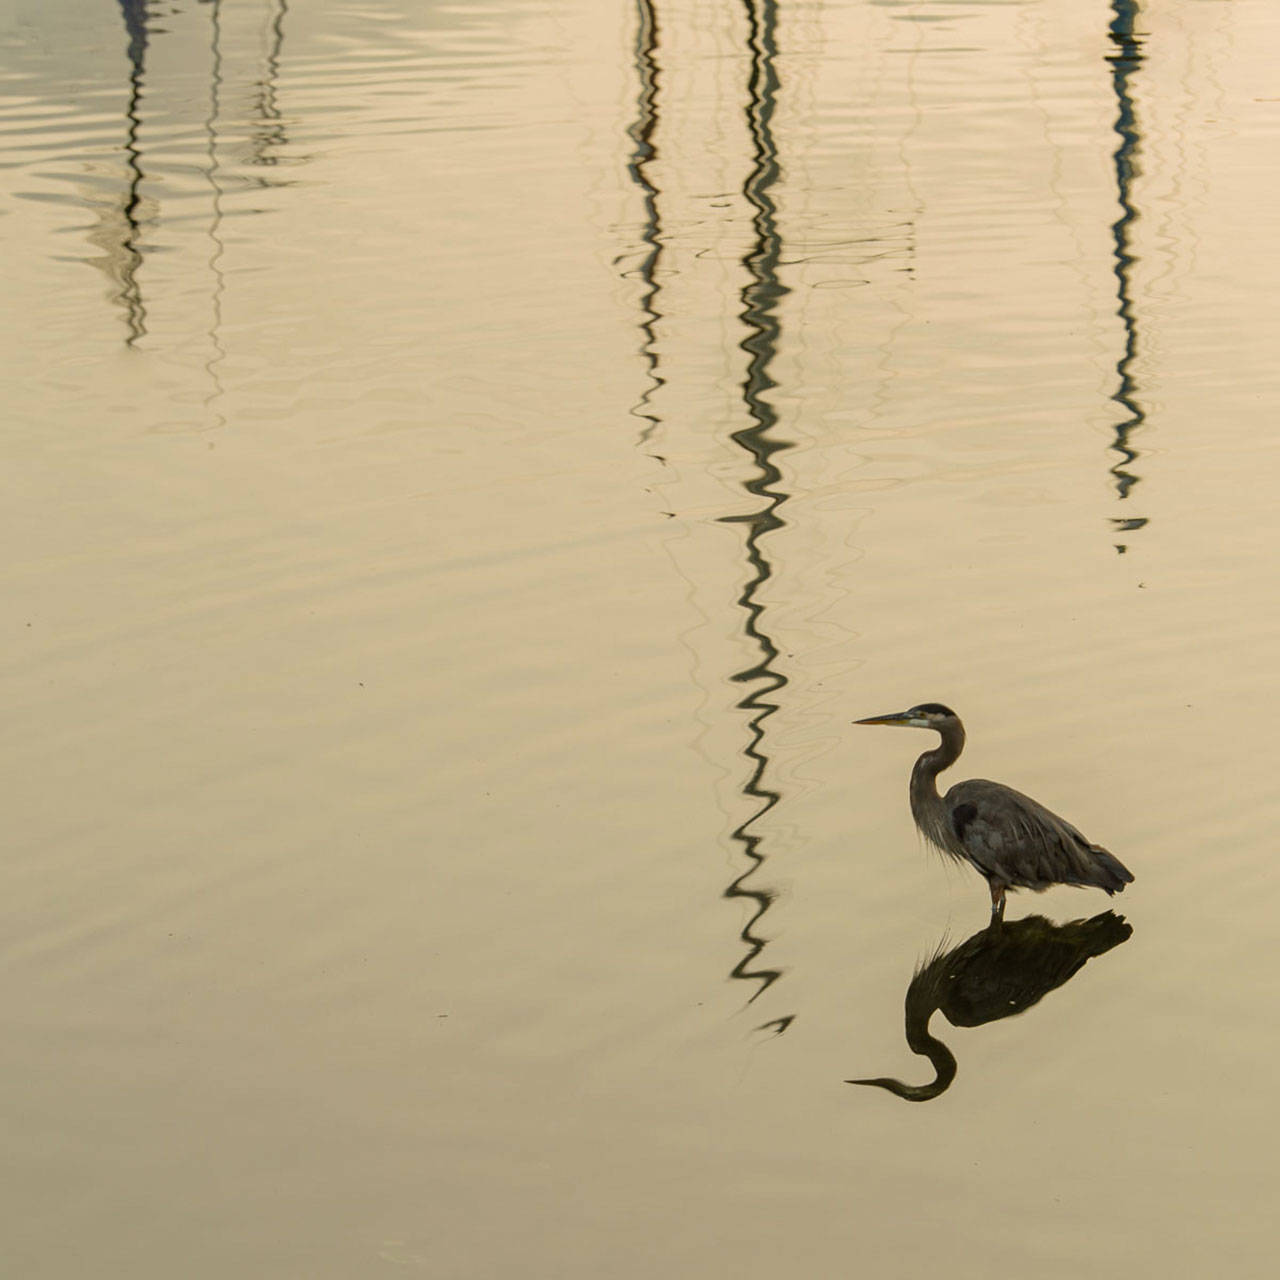 Michael Elenko’s “Blue Heron Port of Call” is on view at Vashon Center for the Arts (Courtesy Photo).